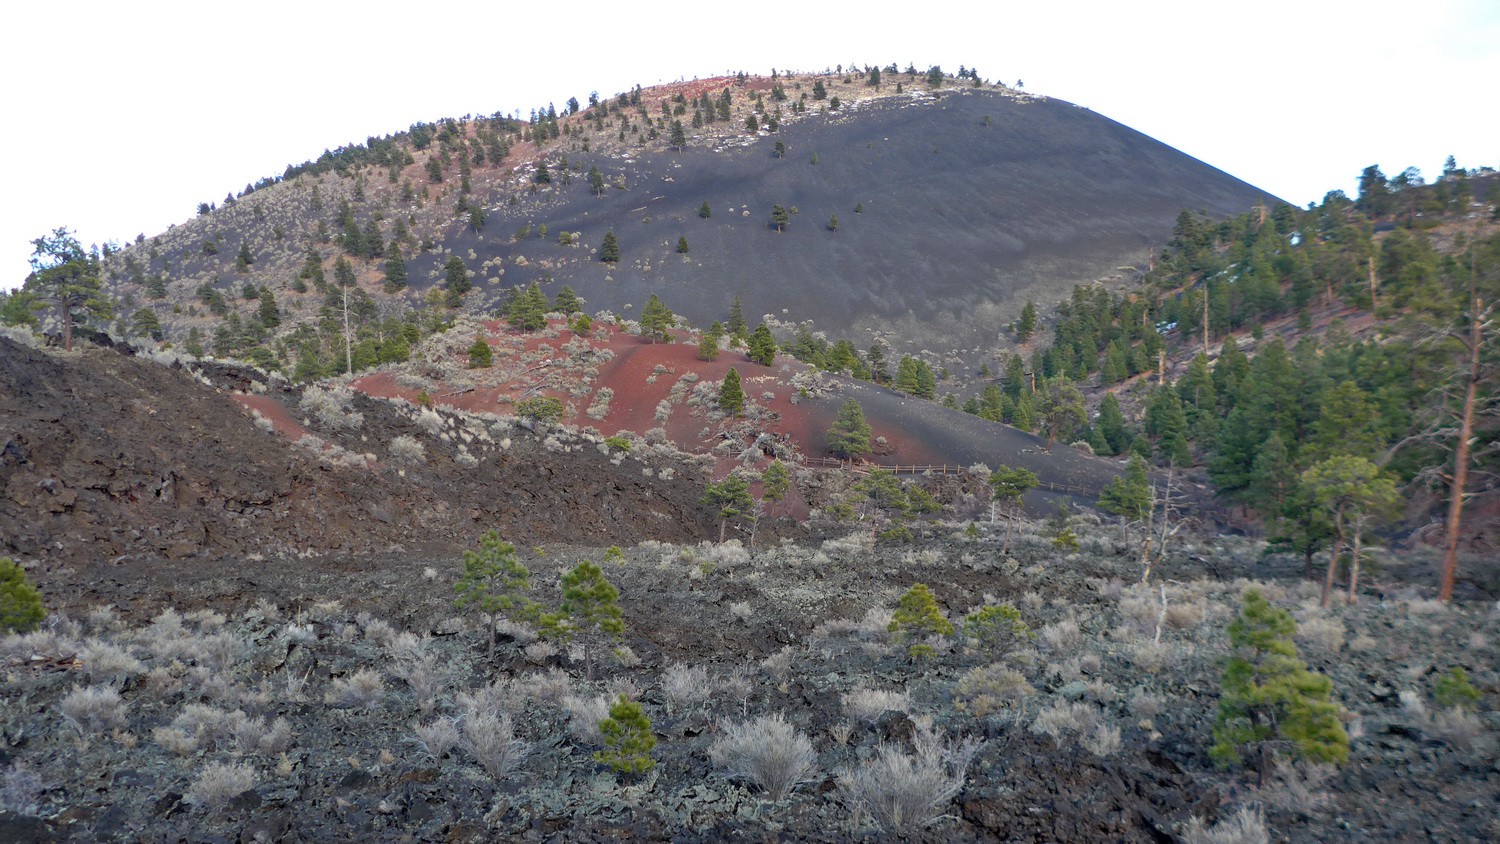 Sunset Crater which erupted between 1040 and 1100AD